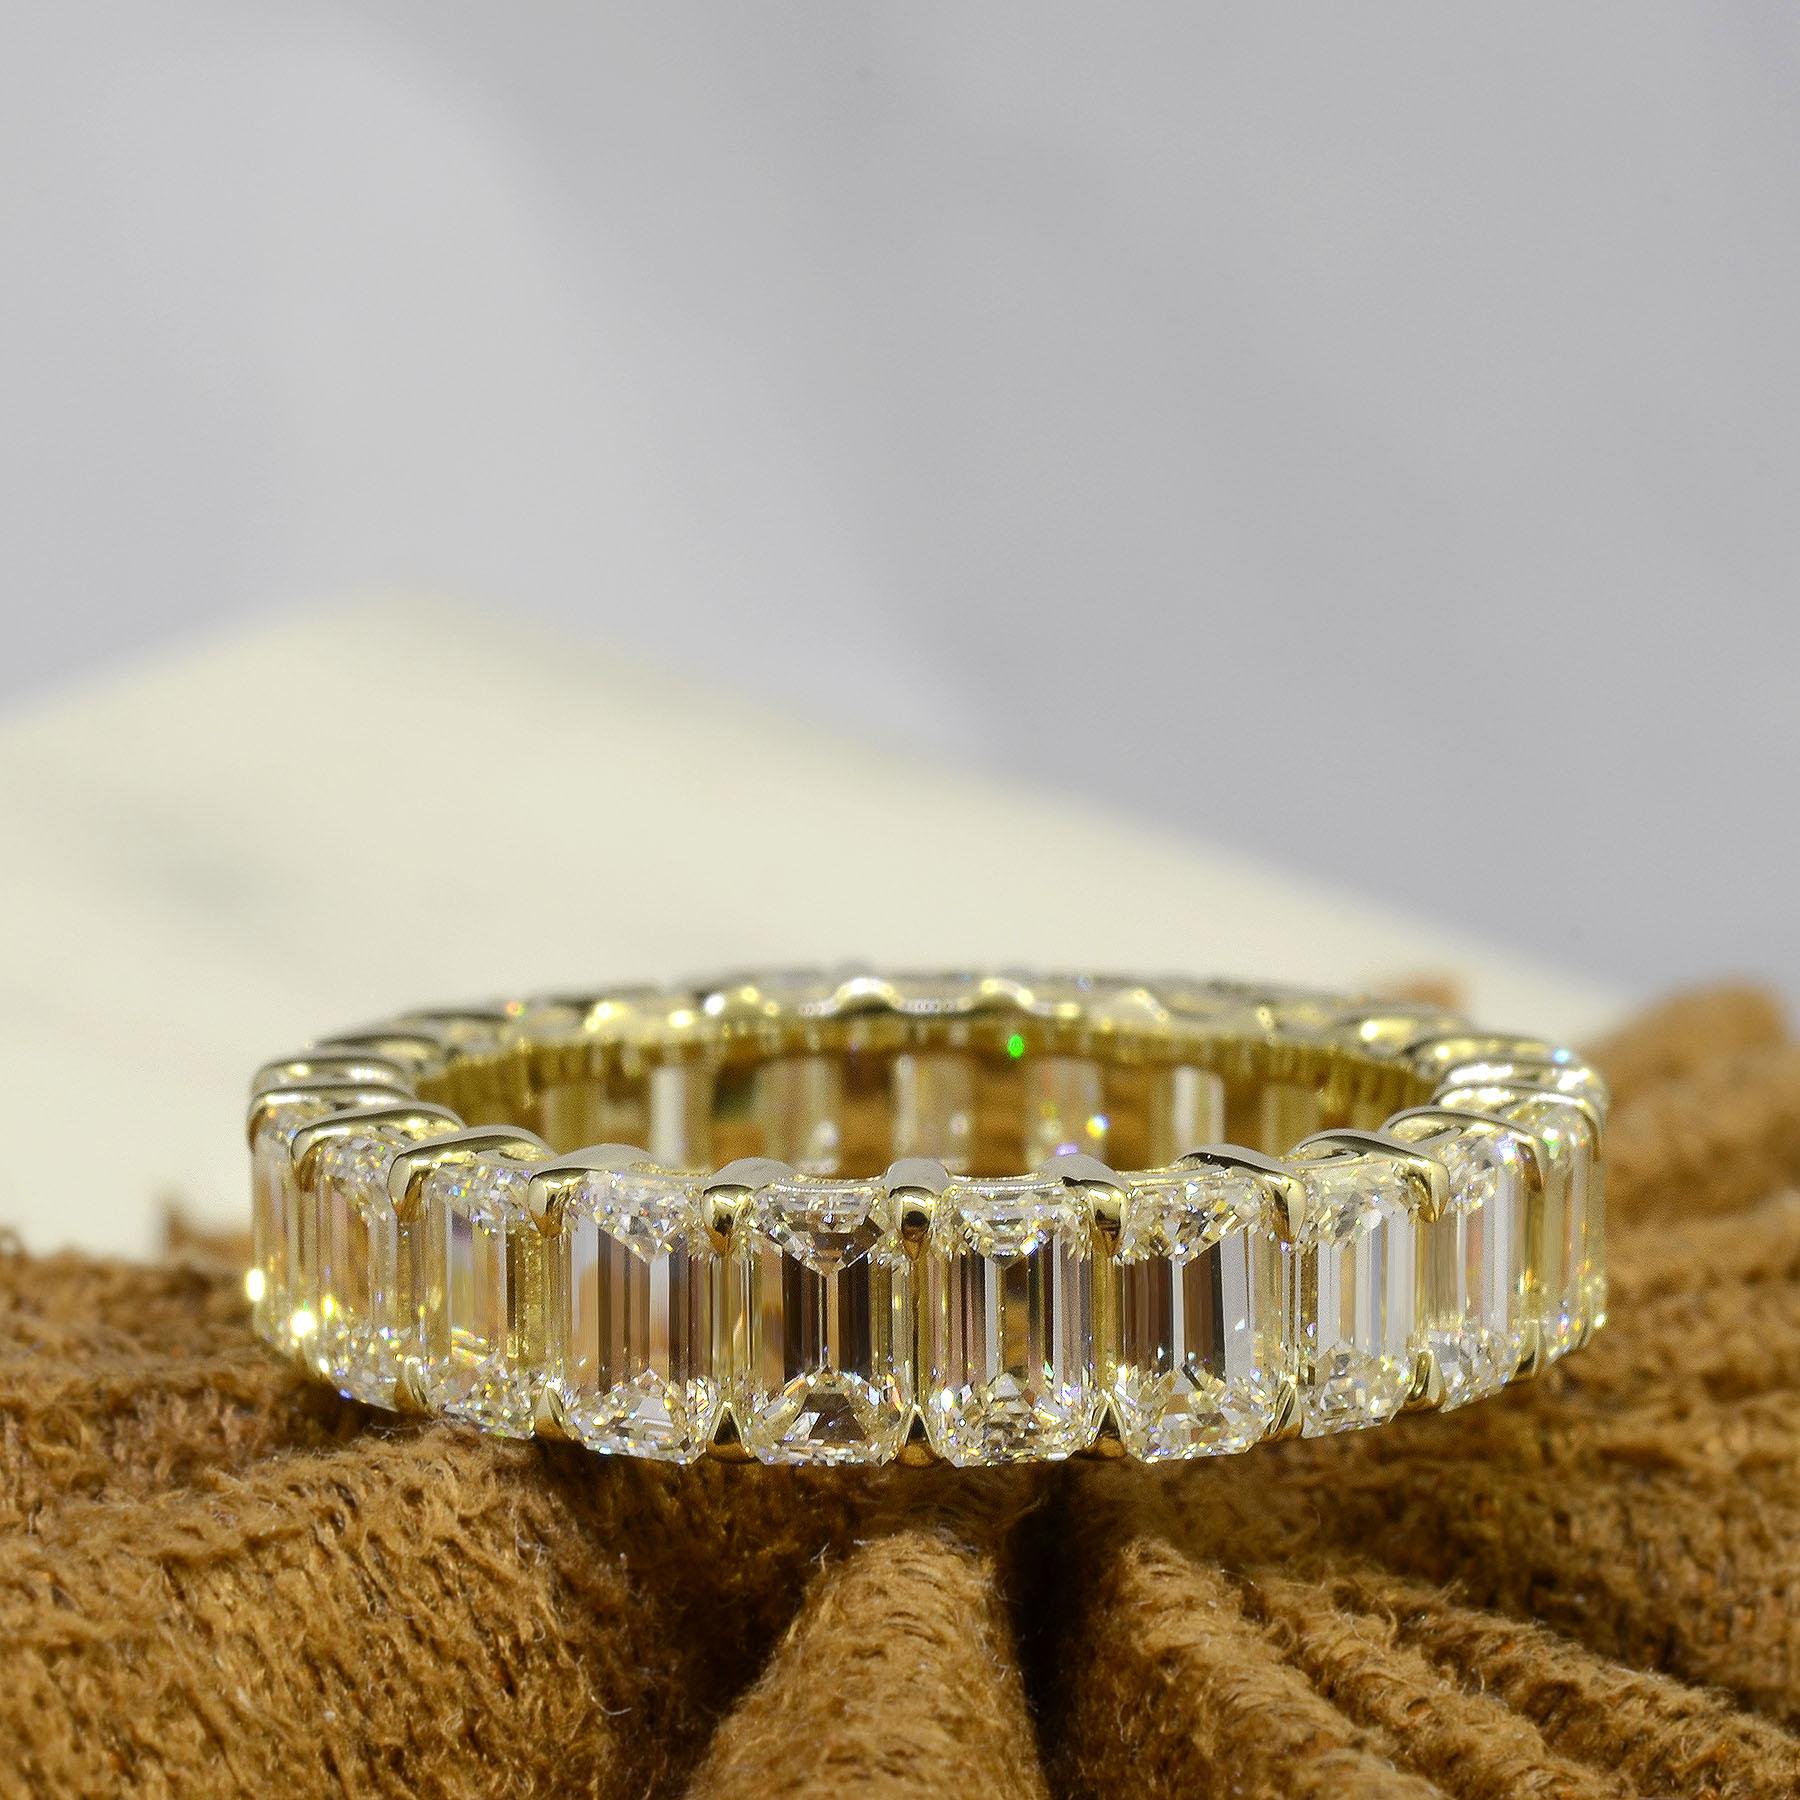 For Sale:  5.50 Carat Emerald Cut Eternity Ring Classic Gallery F-G Color VS1 Clarity 14k 7